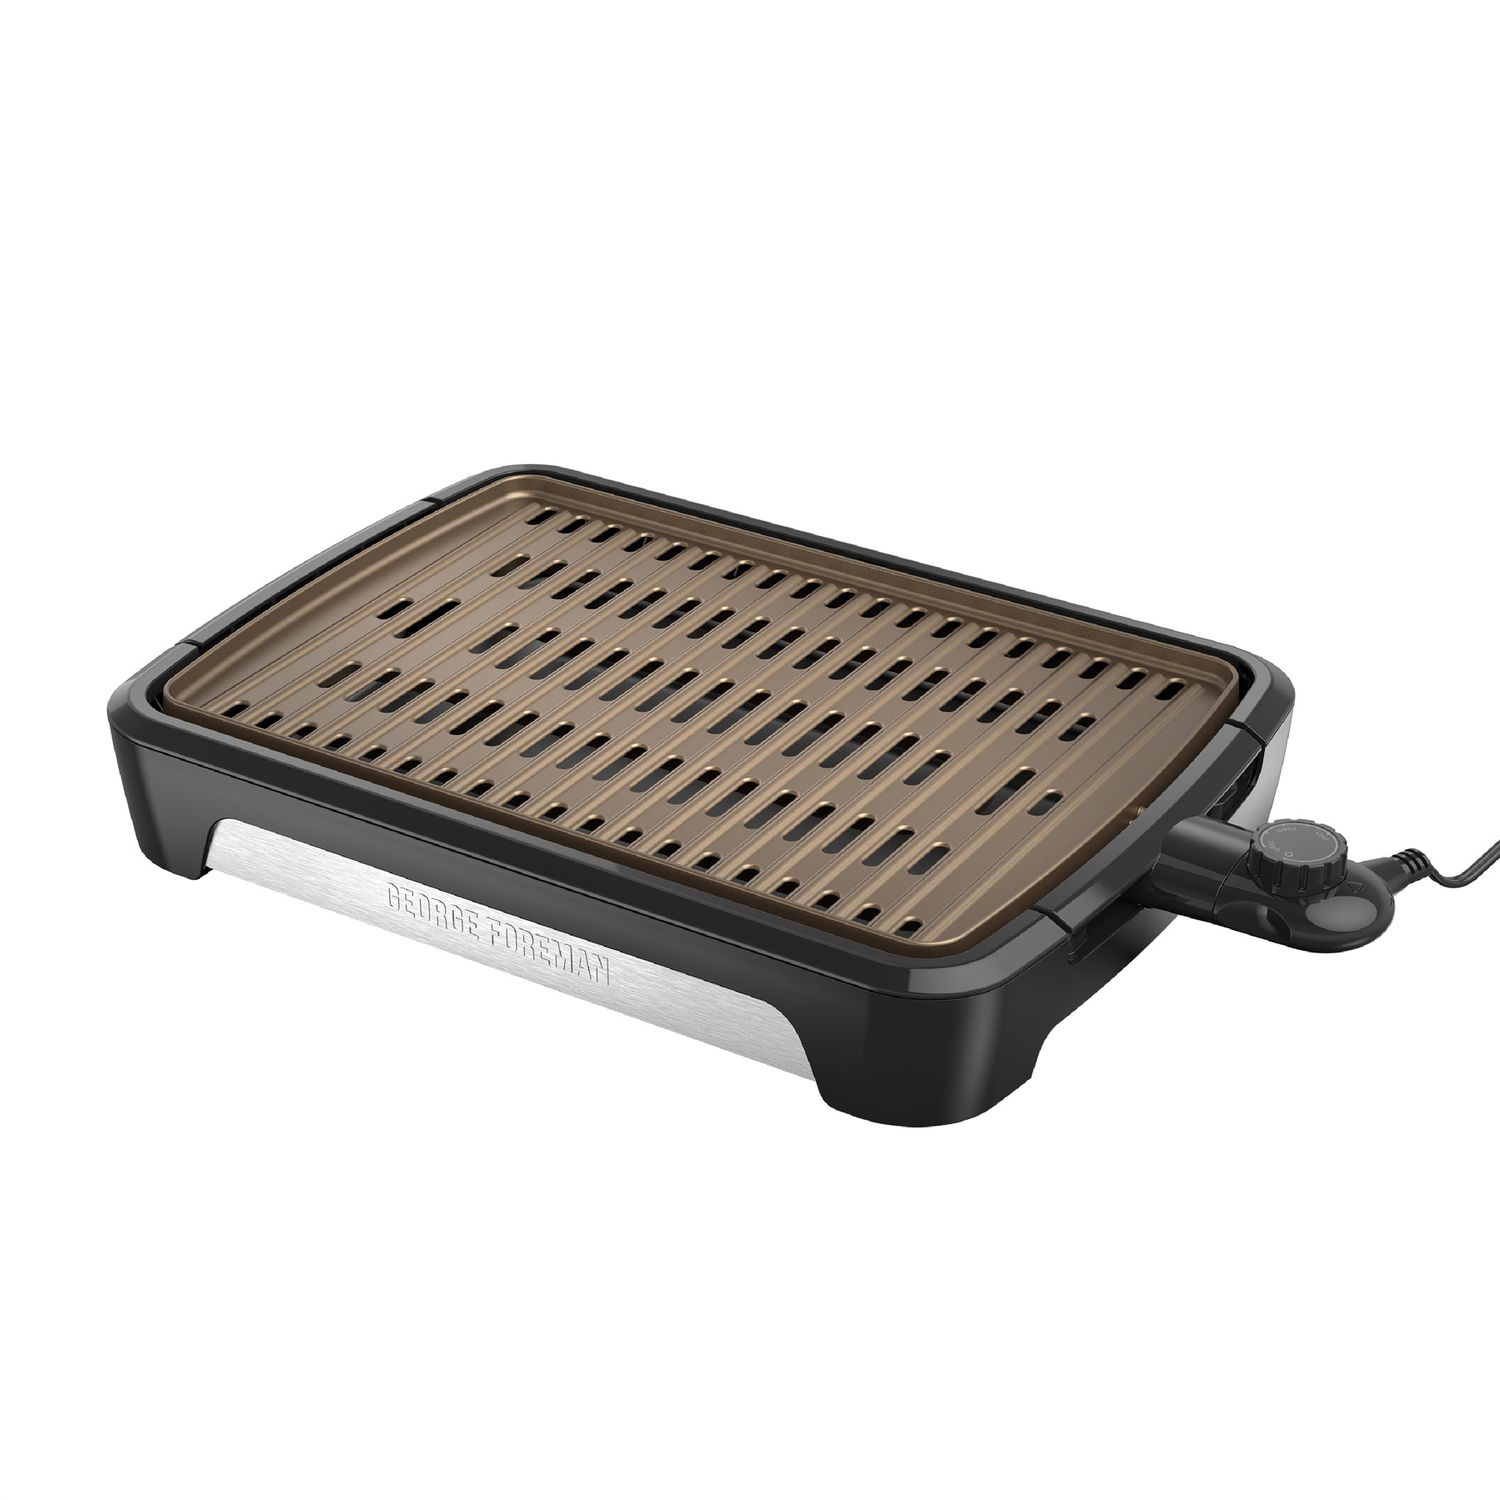 George Foreman Open Grate Smokeless Grill